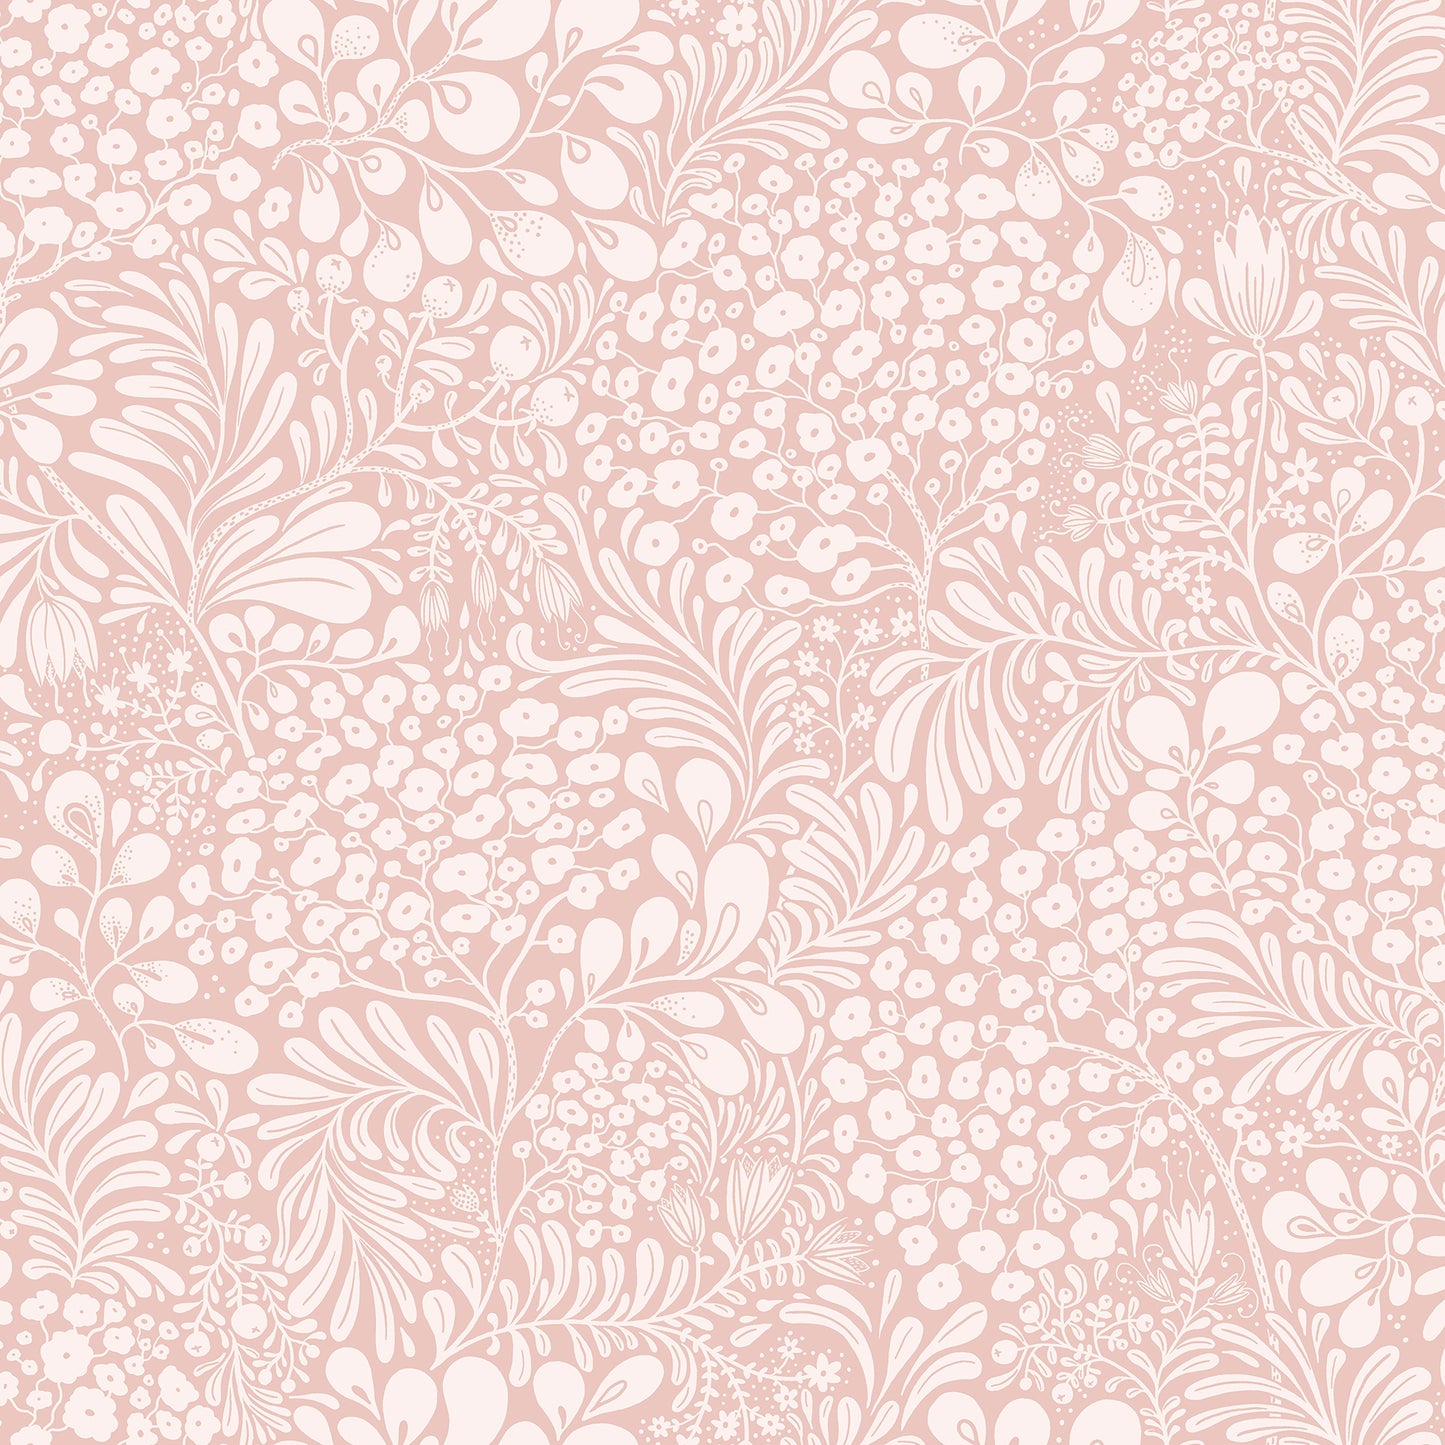 Looking for 2932-65134 Lina Siv Pink Botanical Pink A-Street Prints Wallpaper